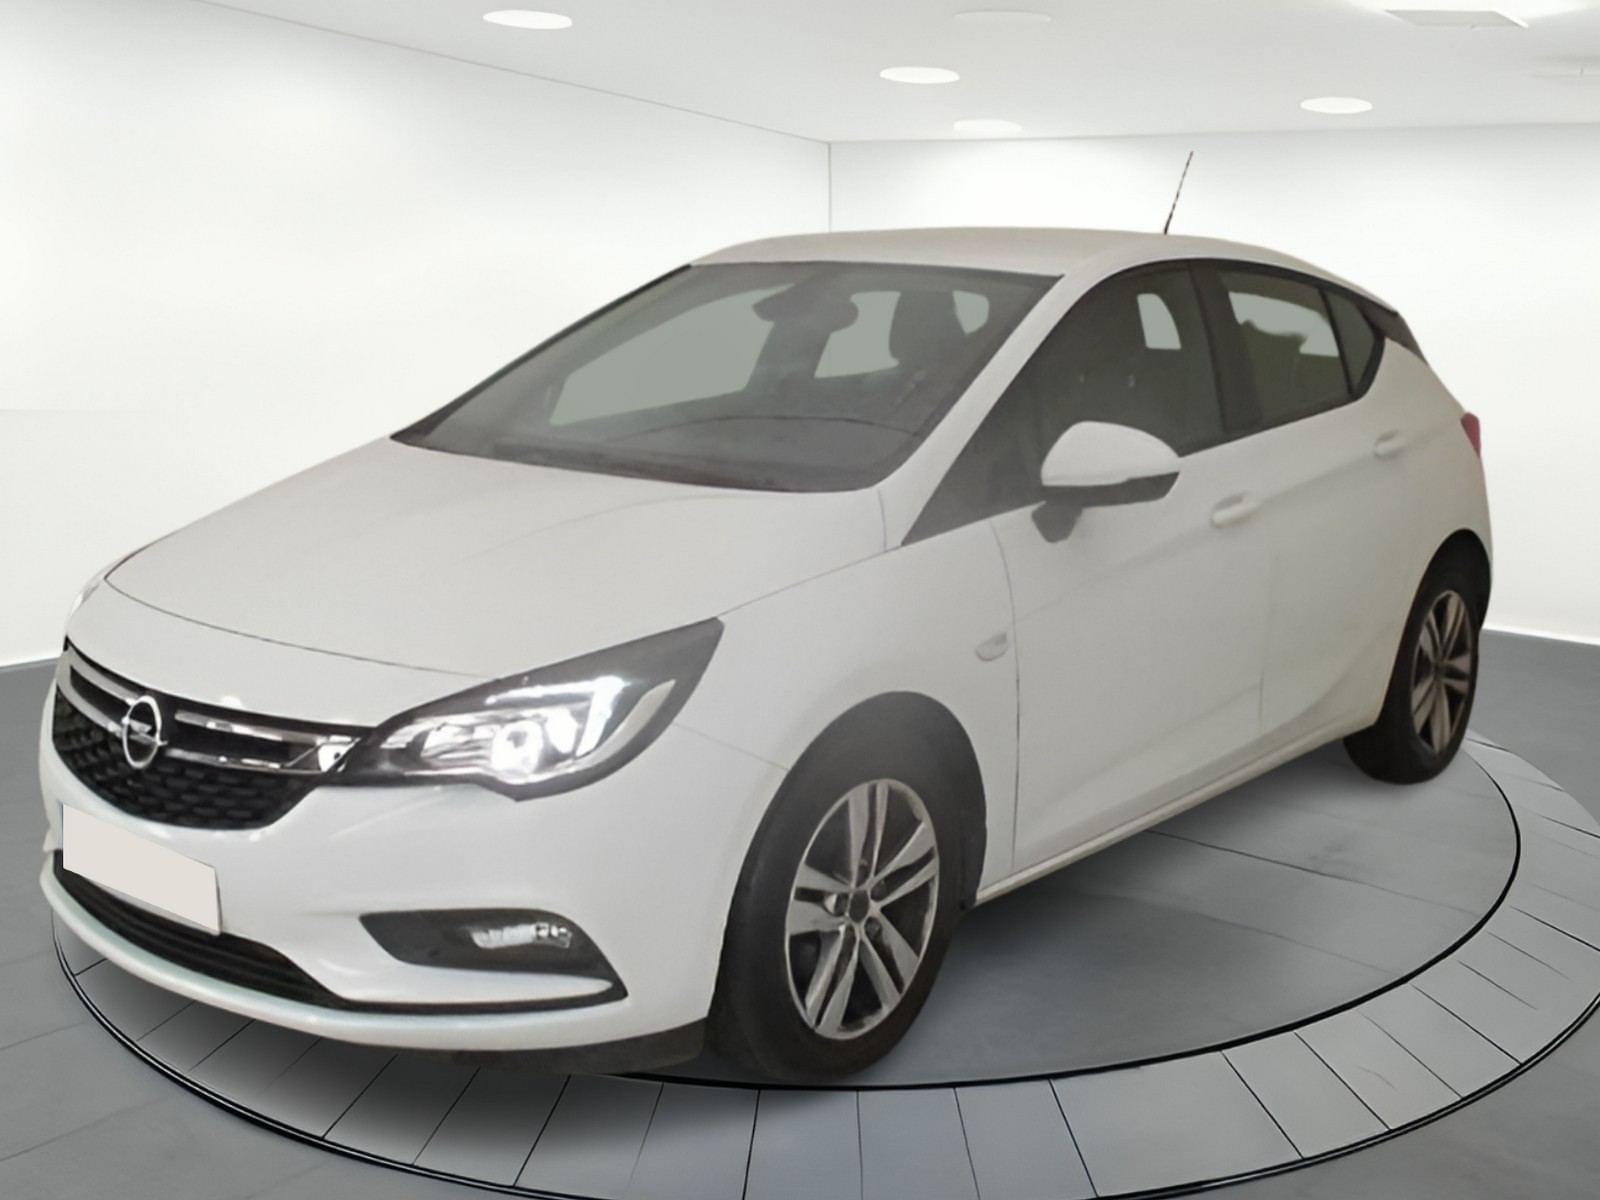 OPEL ASTRA 1.6 CDTI 81KW SELECTIVE PRO S/S 1 